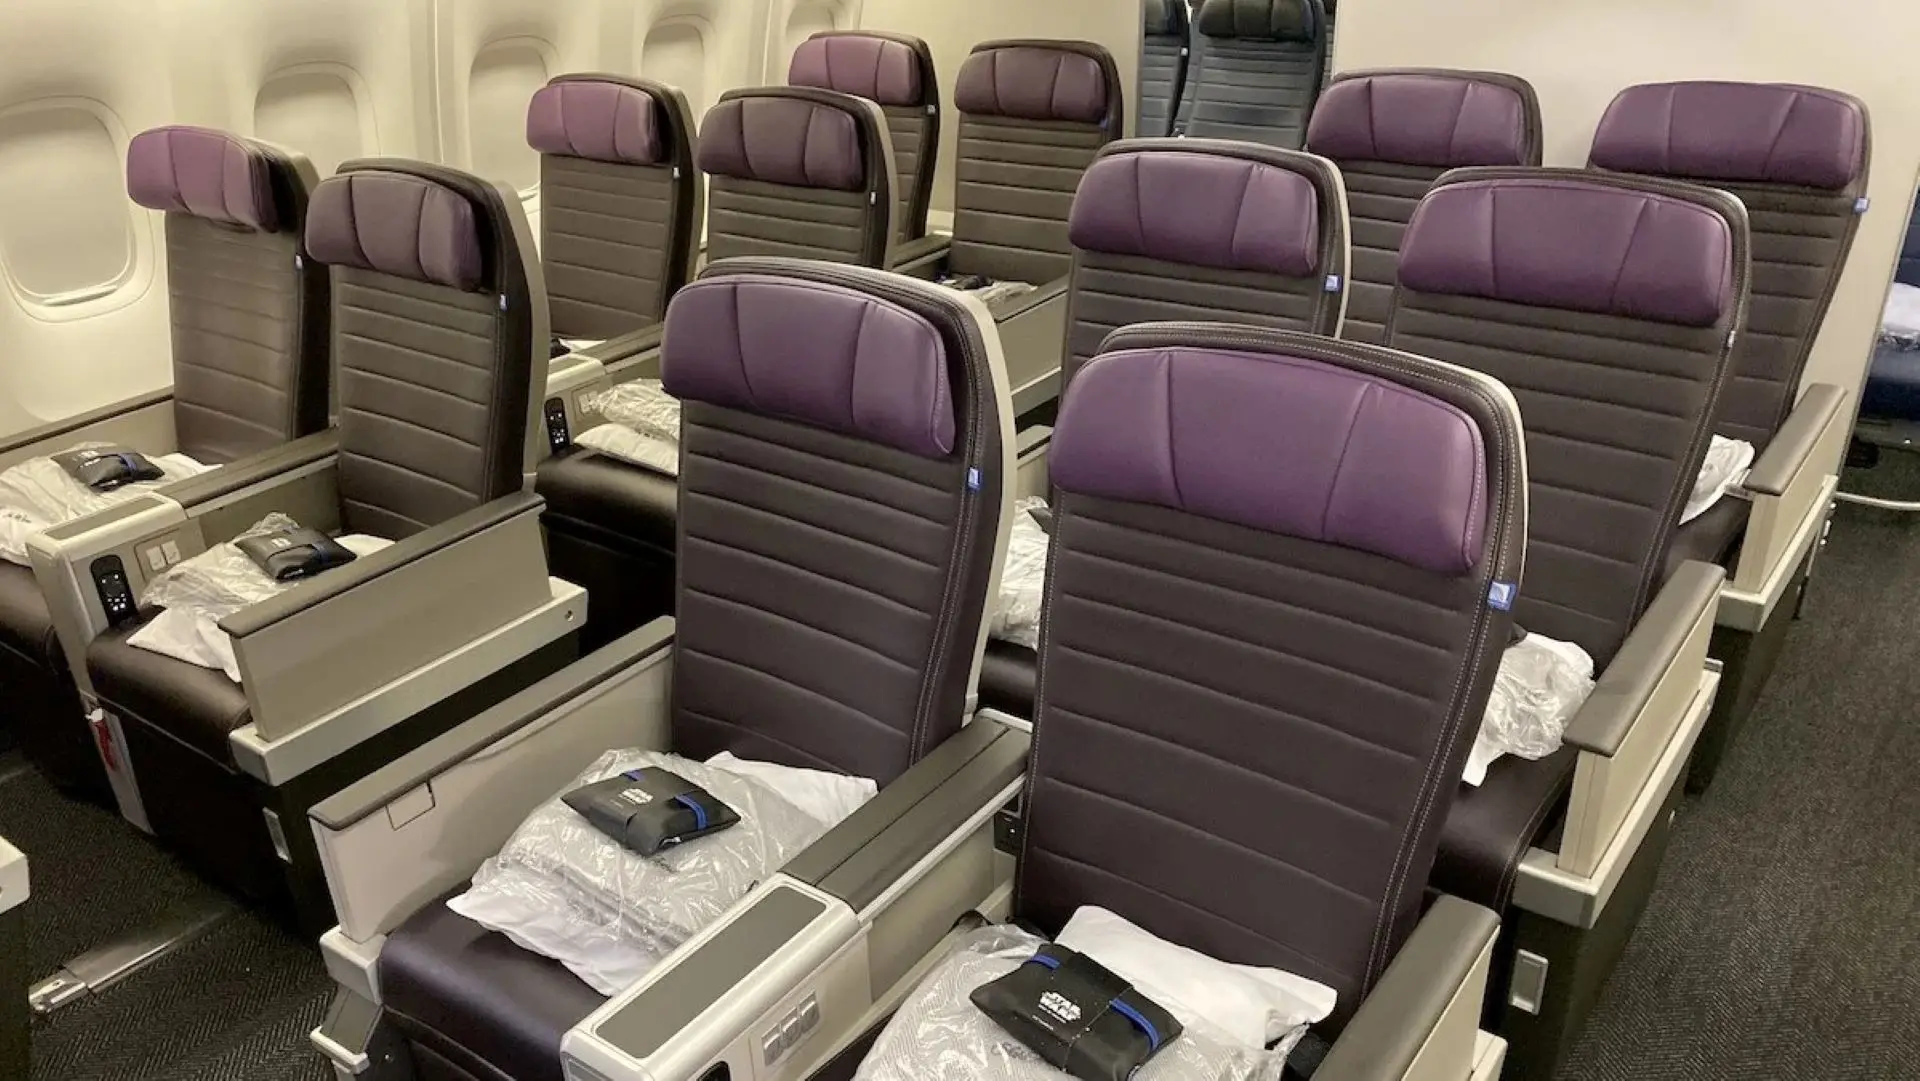 Airlines News - United retrofits Polaris seating to 767-400 fleet by mid-2023